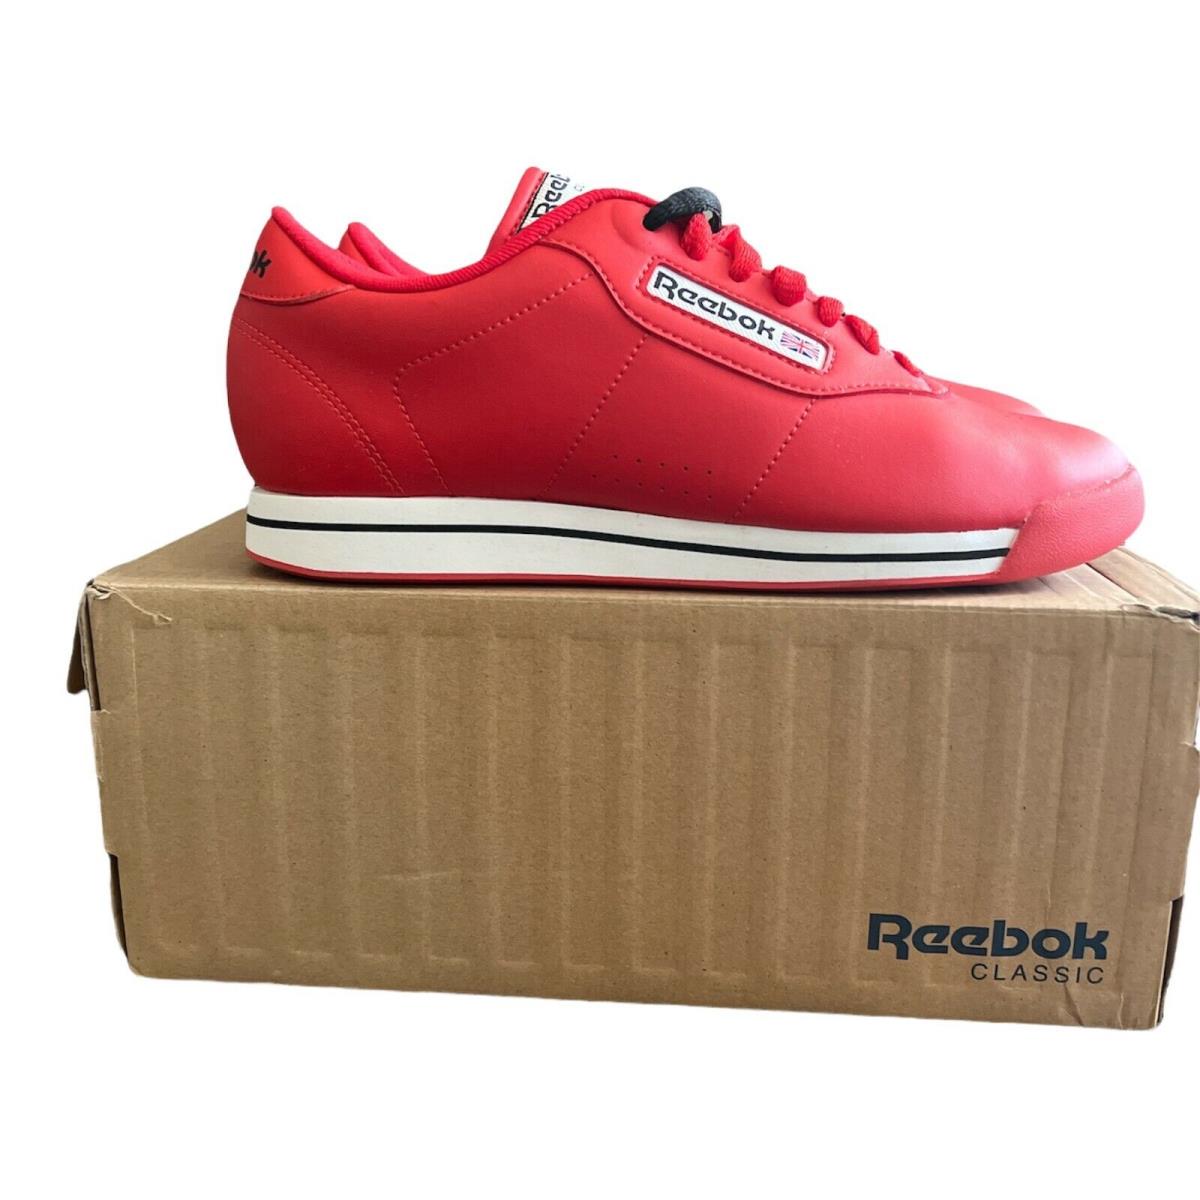 Reebok Womens Classic J95025 Red Lace Up Low Top Sneakers Shoes Size 6.5